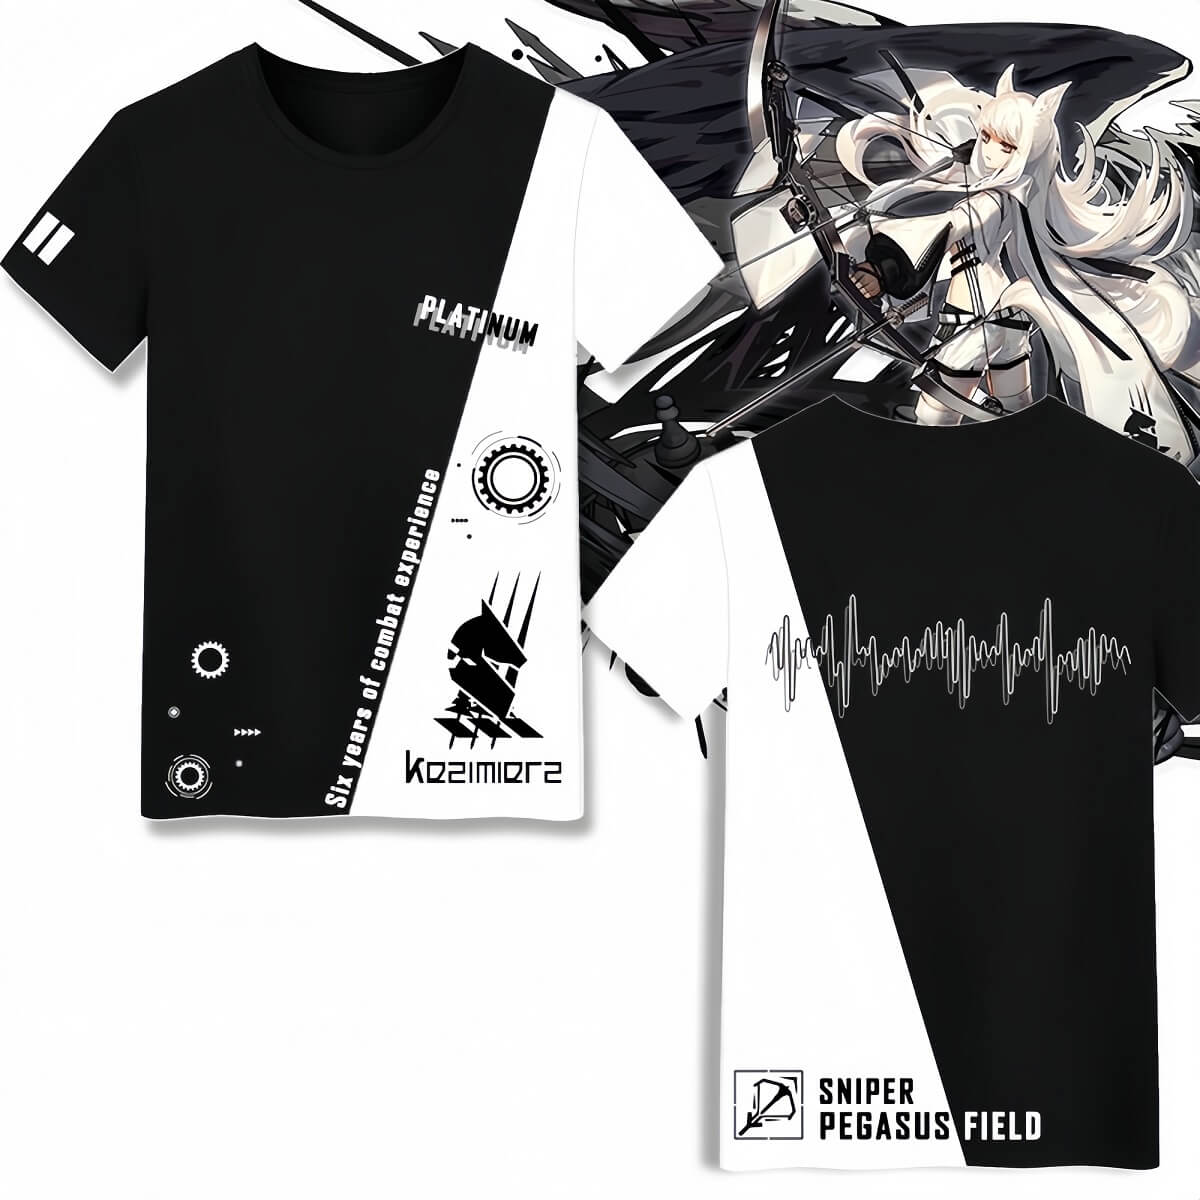 Arknights Platinum character style T-shirt